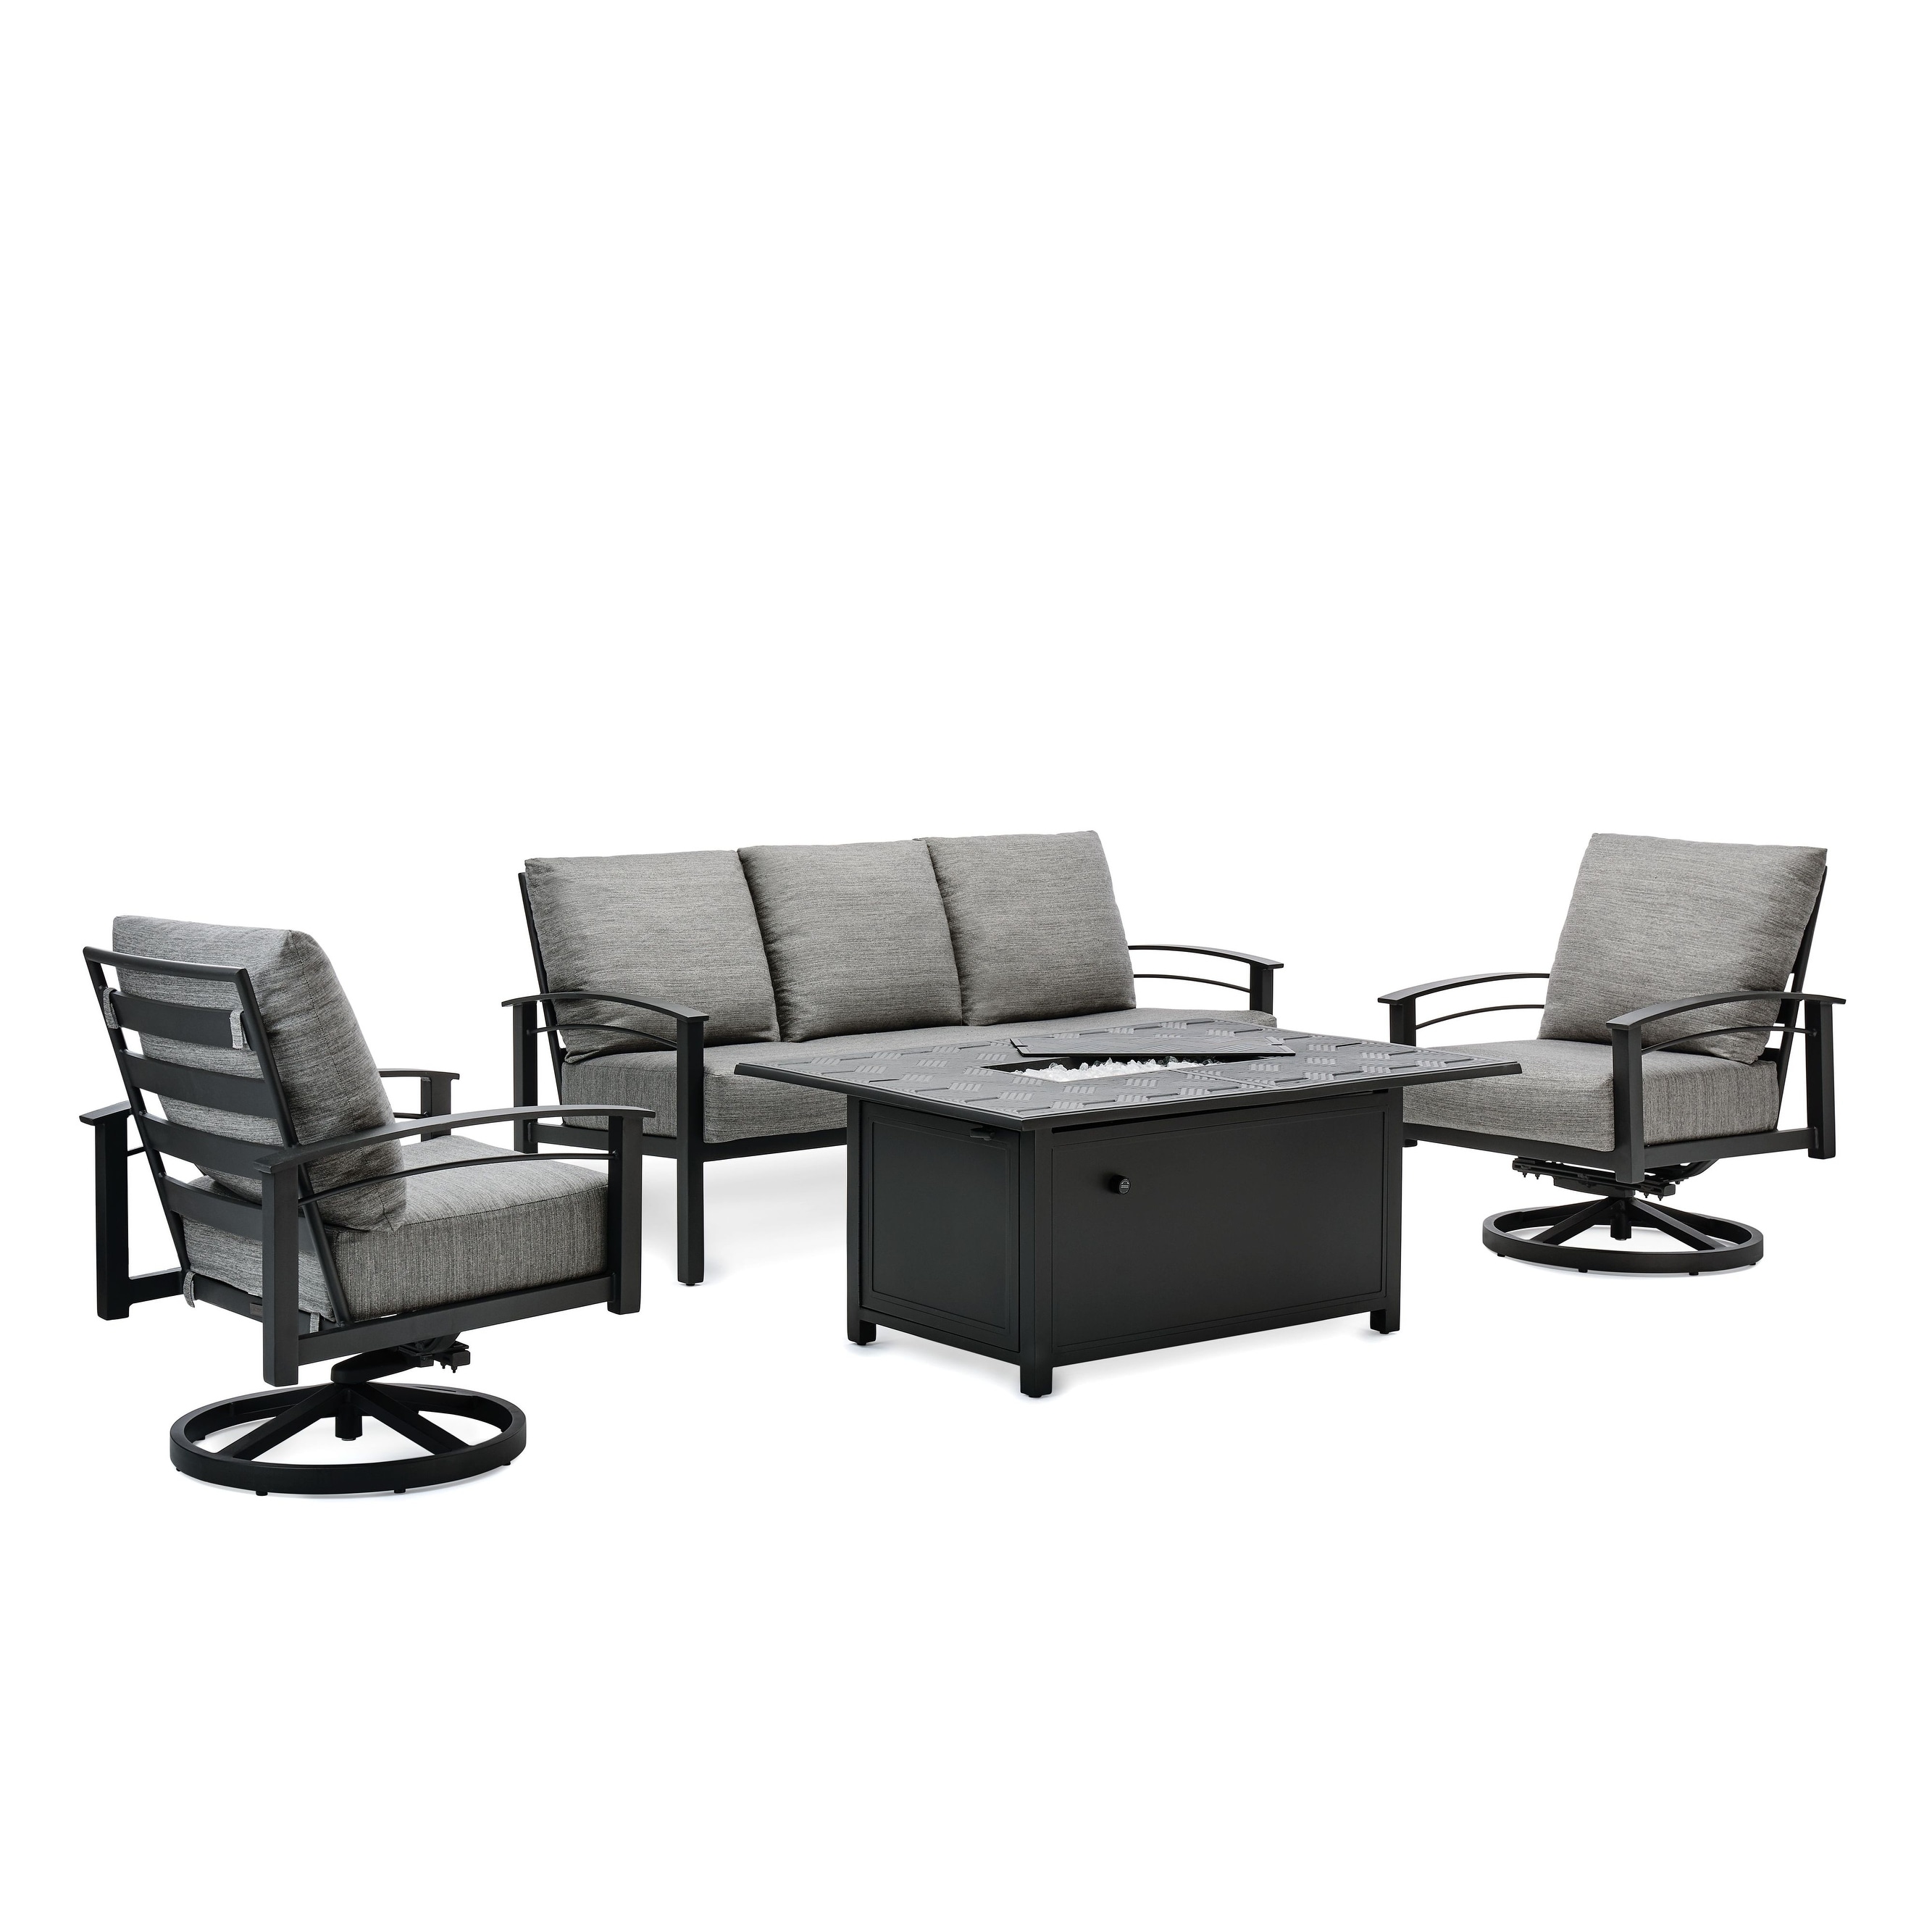 Stanford Cushion 4-pc Sunbrella Set With 2 Swivel Chairs  Sofa  And Rectangle Fire Table